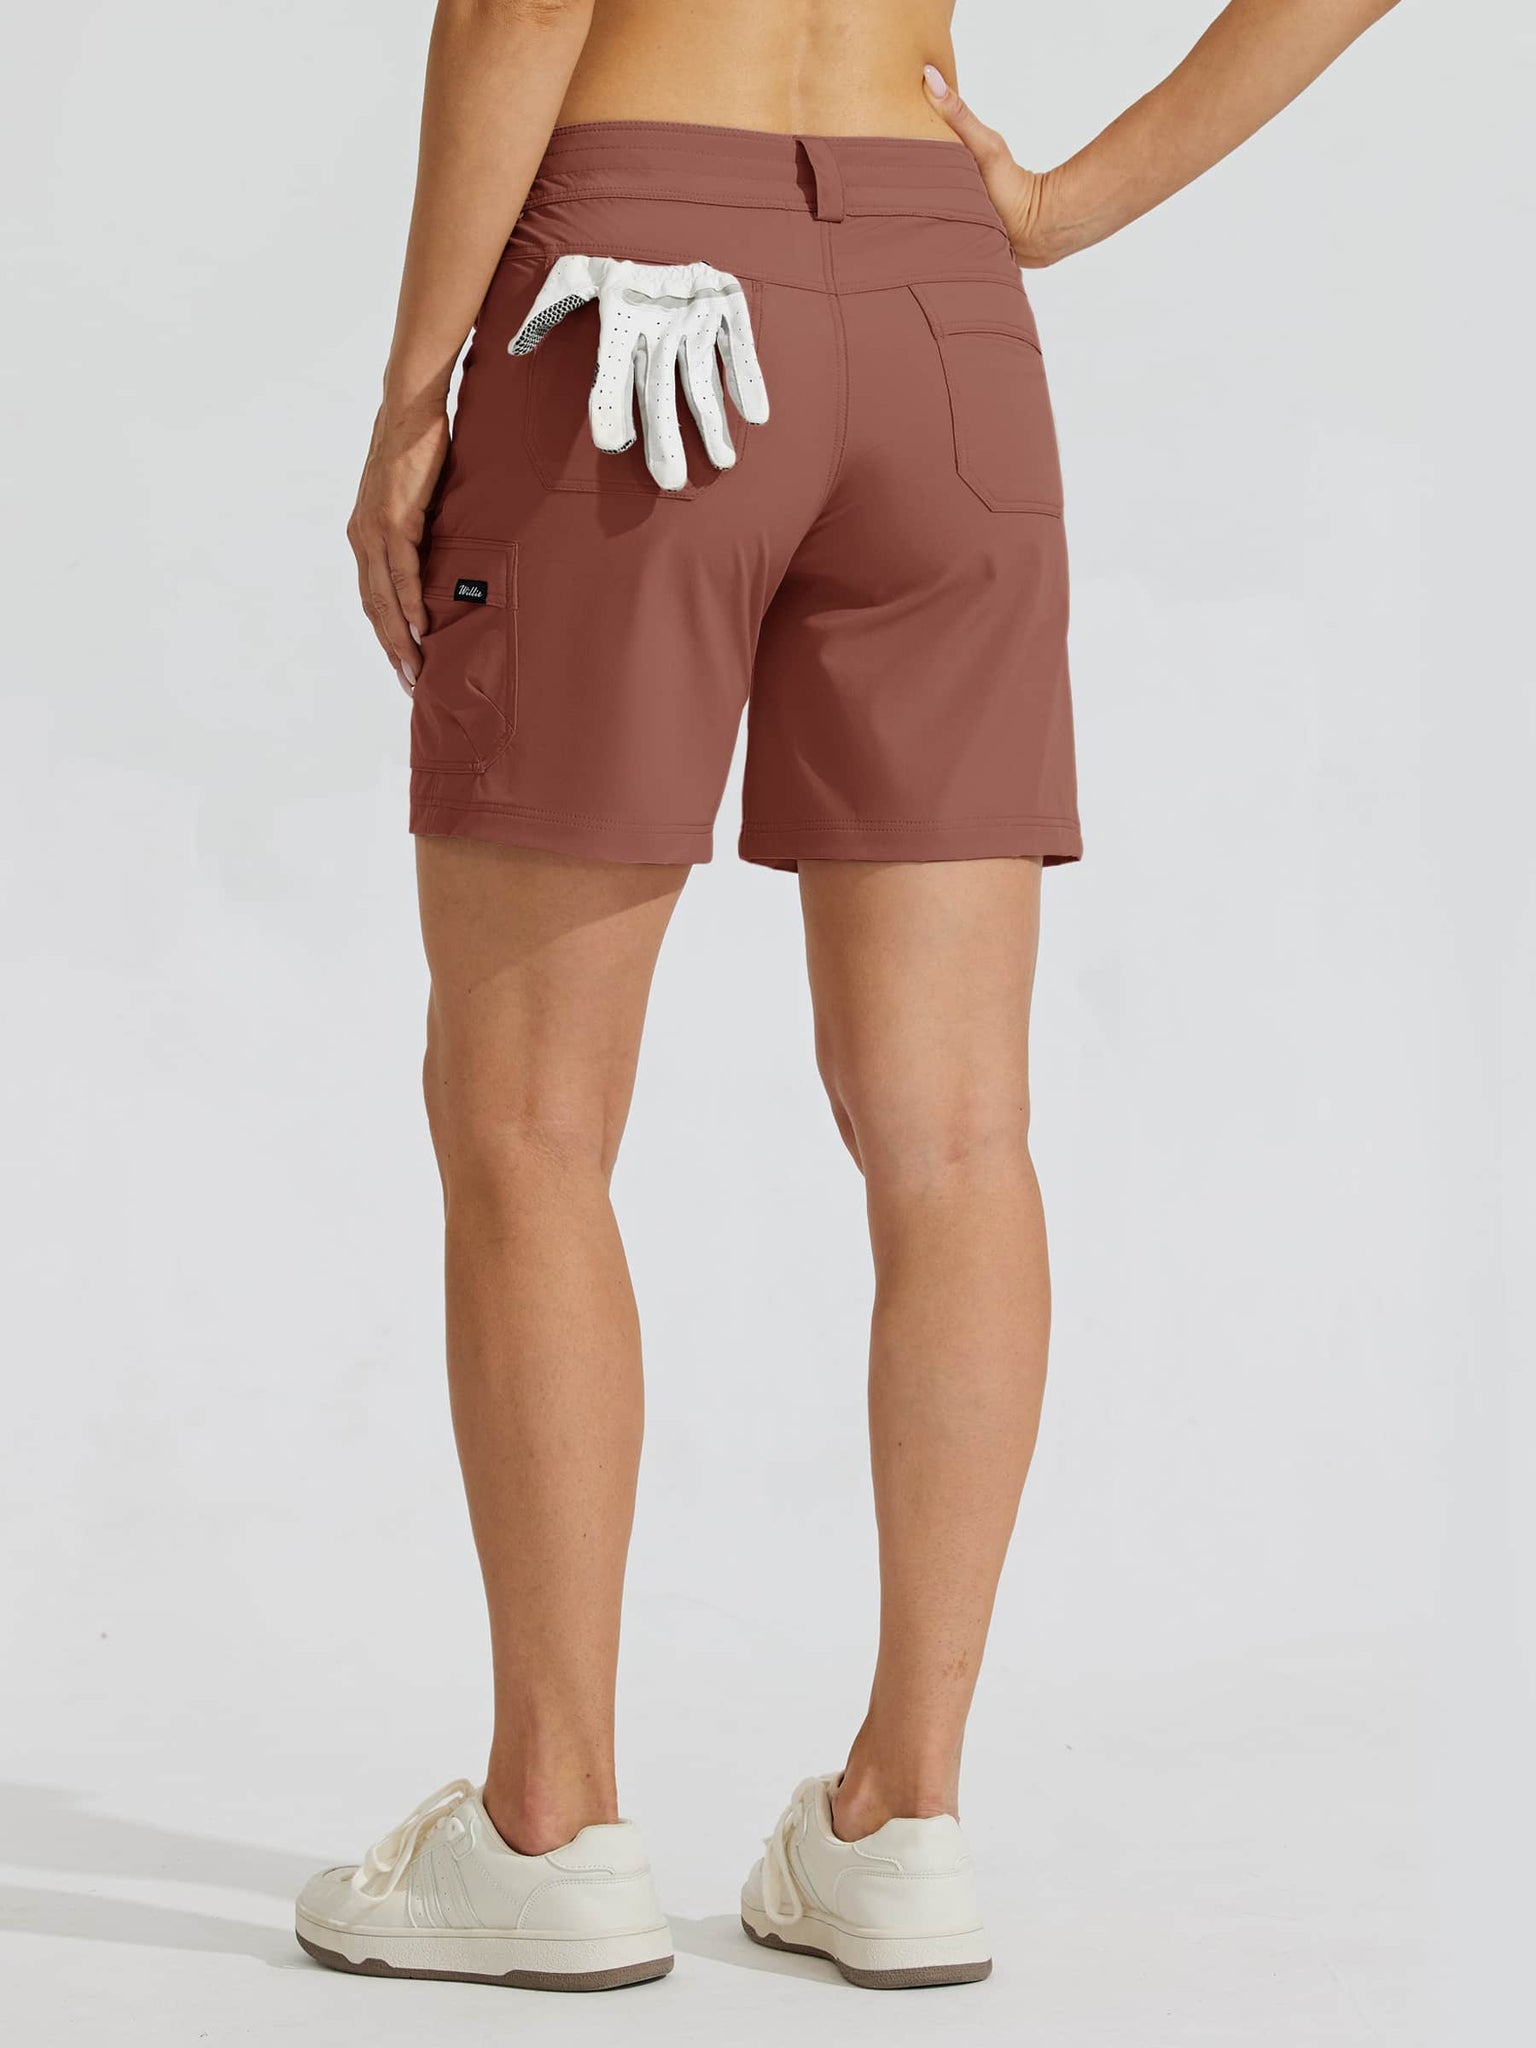 Women's Outdoor Pro Shorts Cacao_hover_model